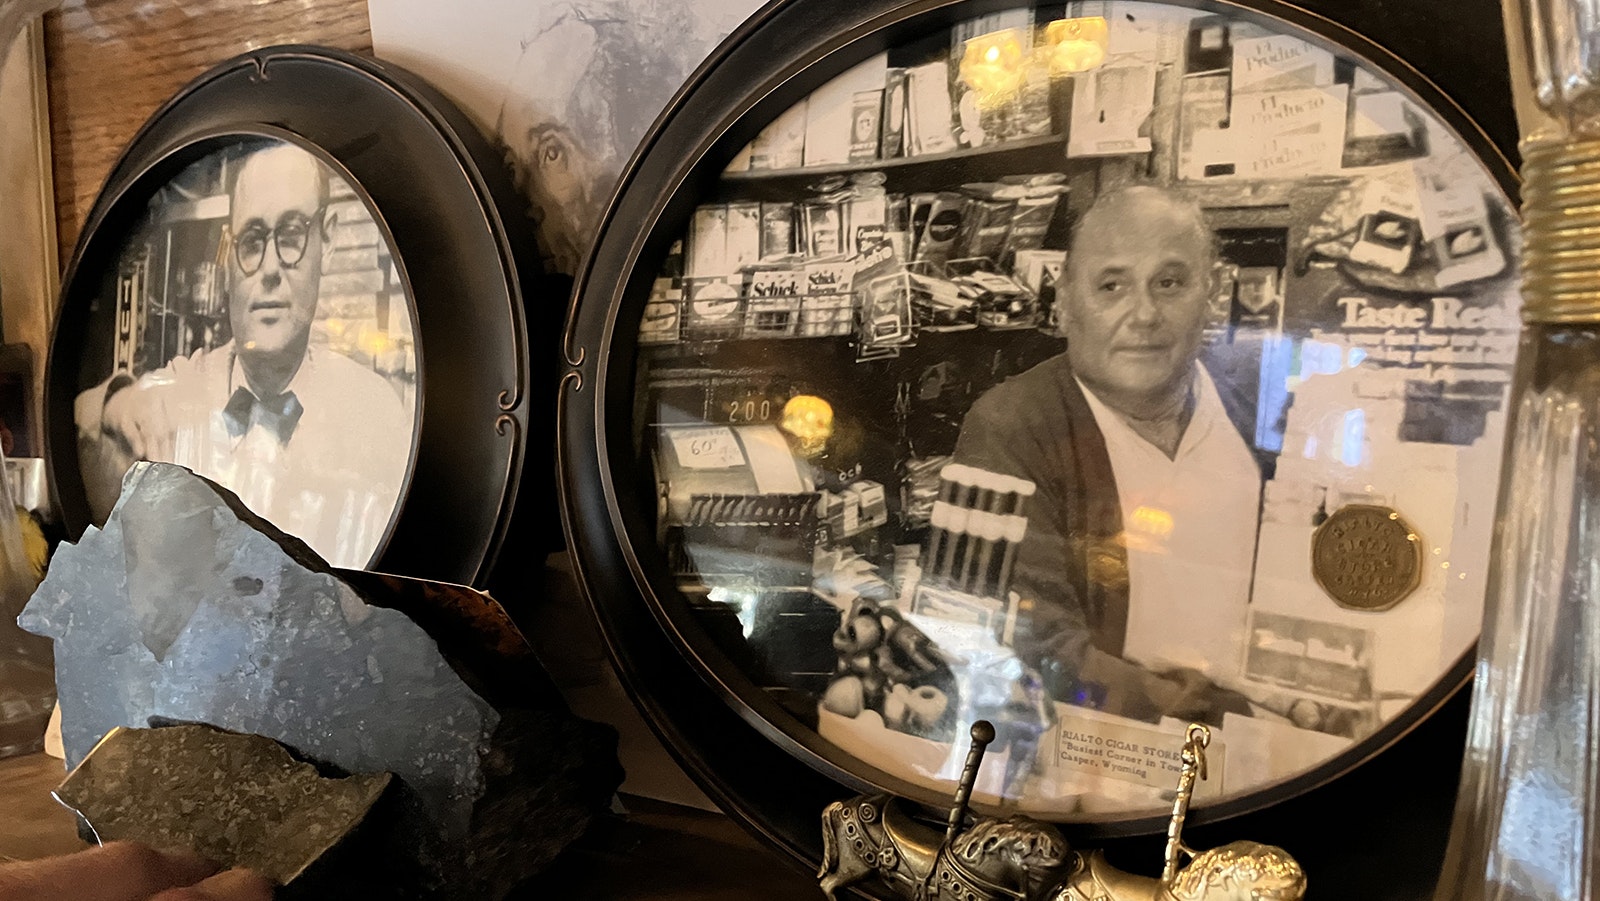 Photos that show George Panos as a young and older man are on the shelf. George and his wife, Helen, ran a cigar shop and soda fountain for several years.